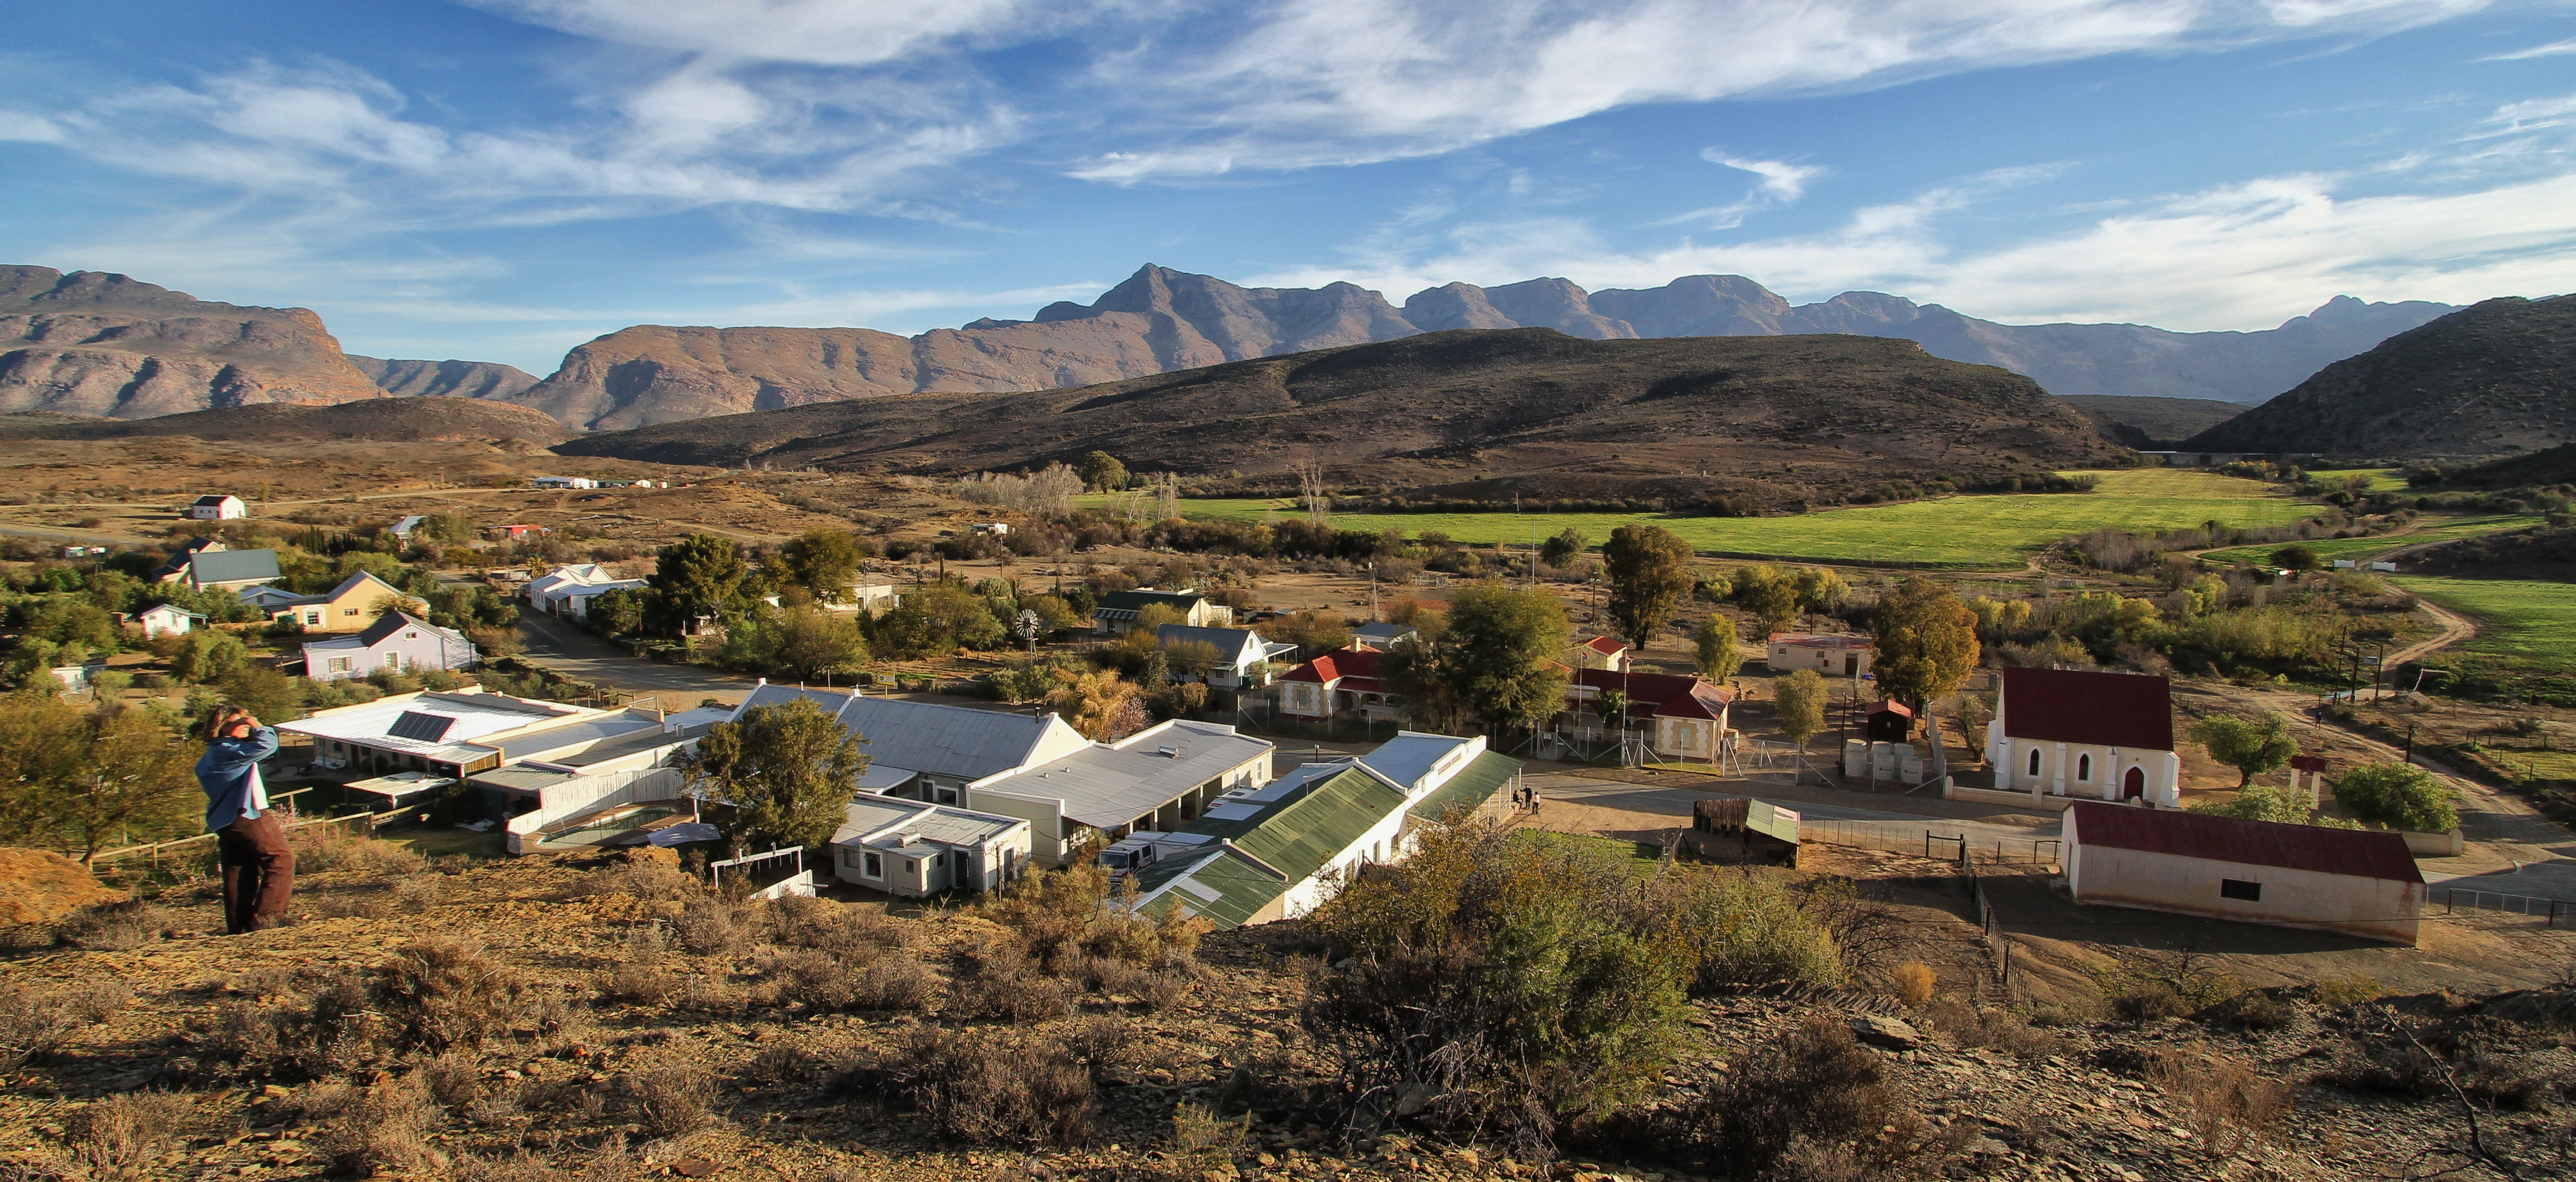 Klaarstroom, the tiny Western Cape Karoo village with the huge view. Image: Chris Marais